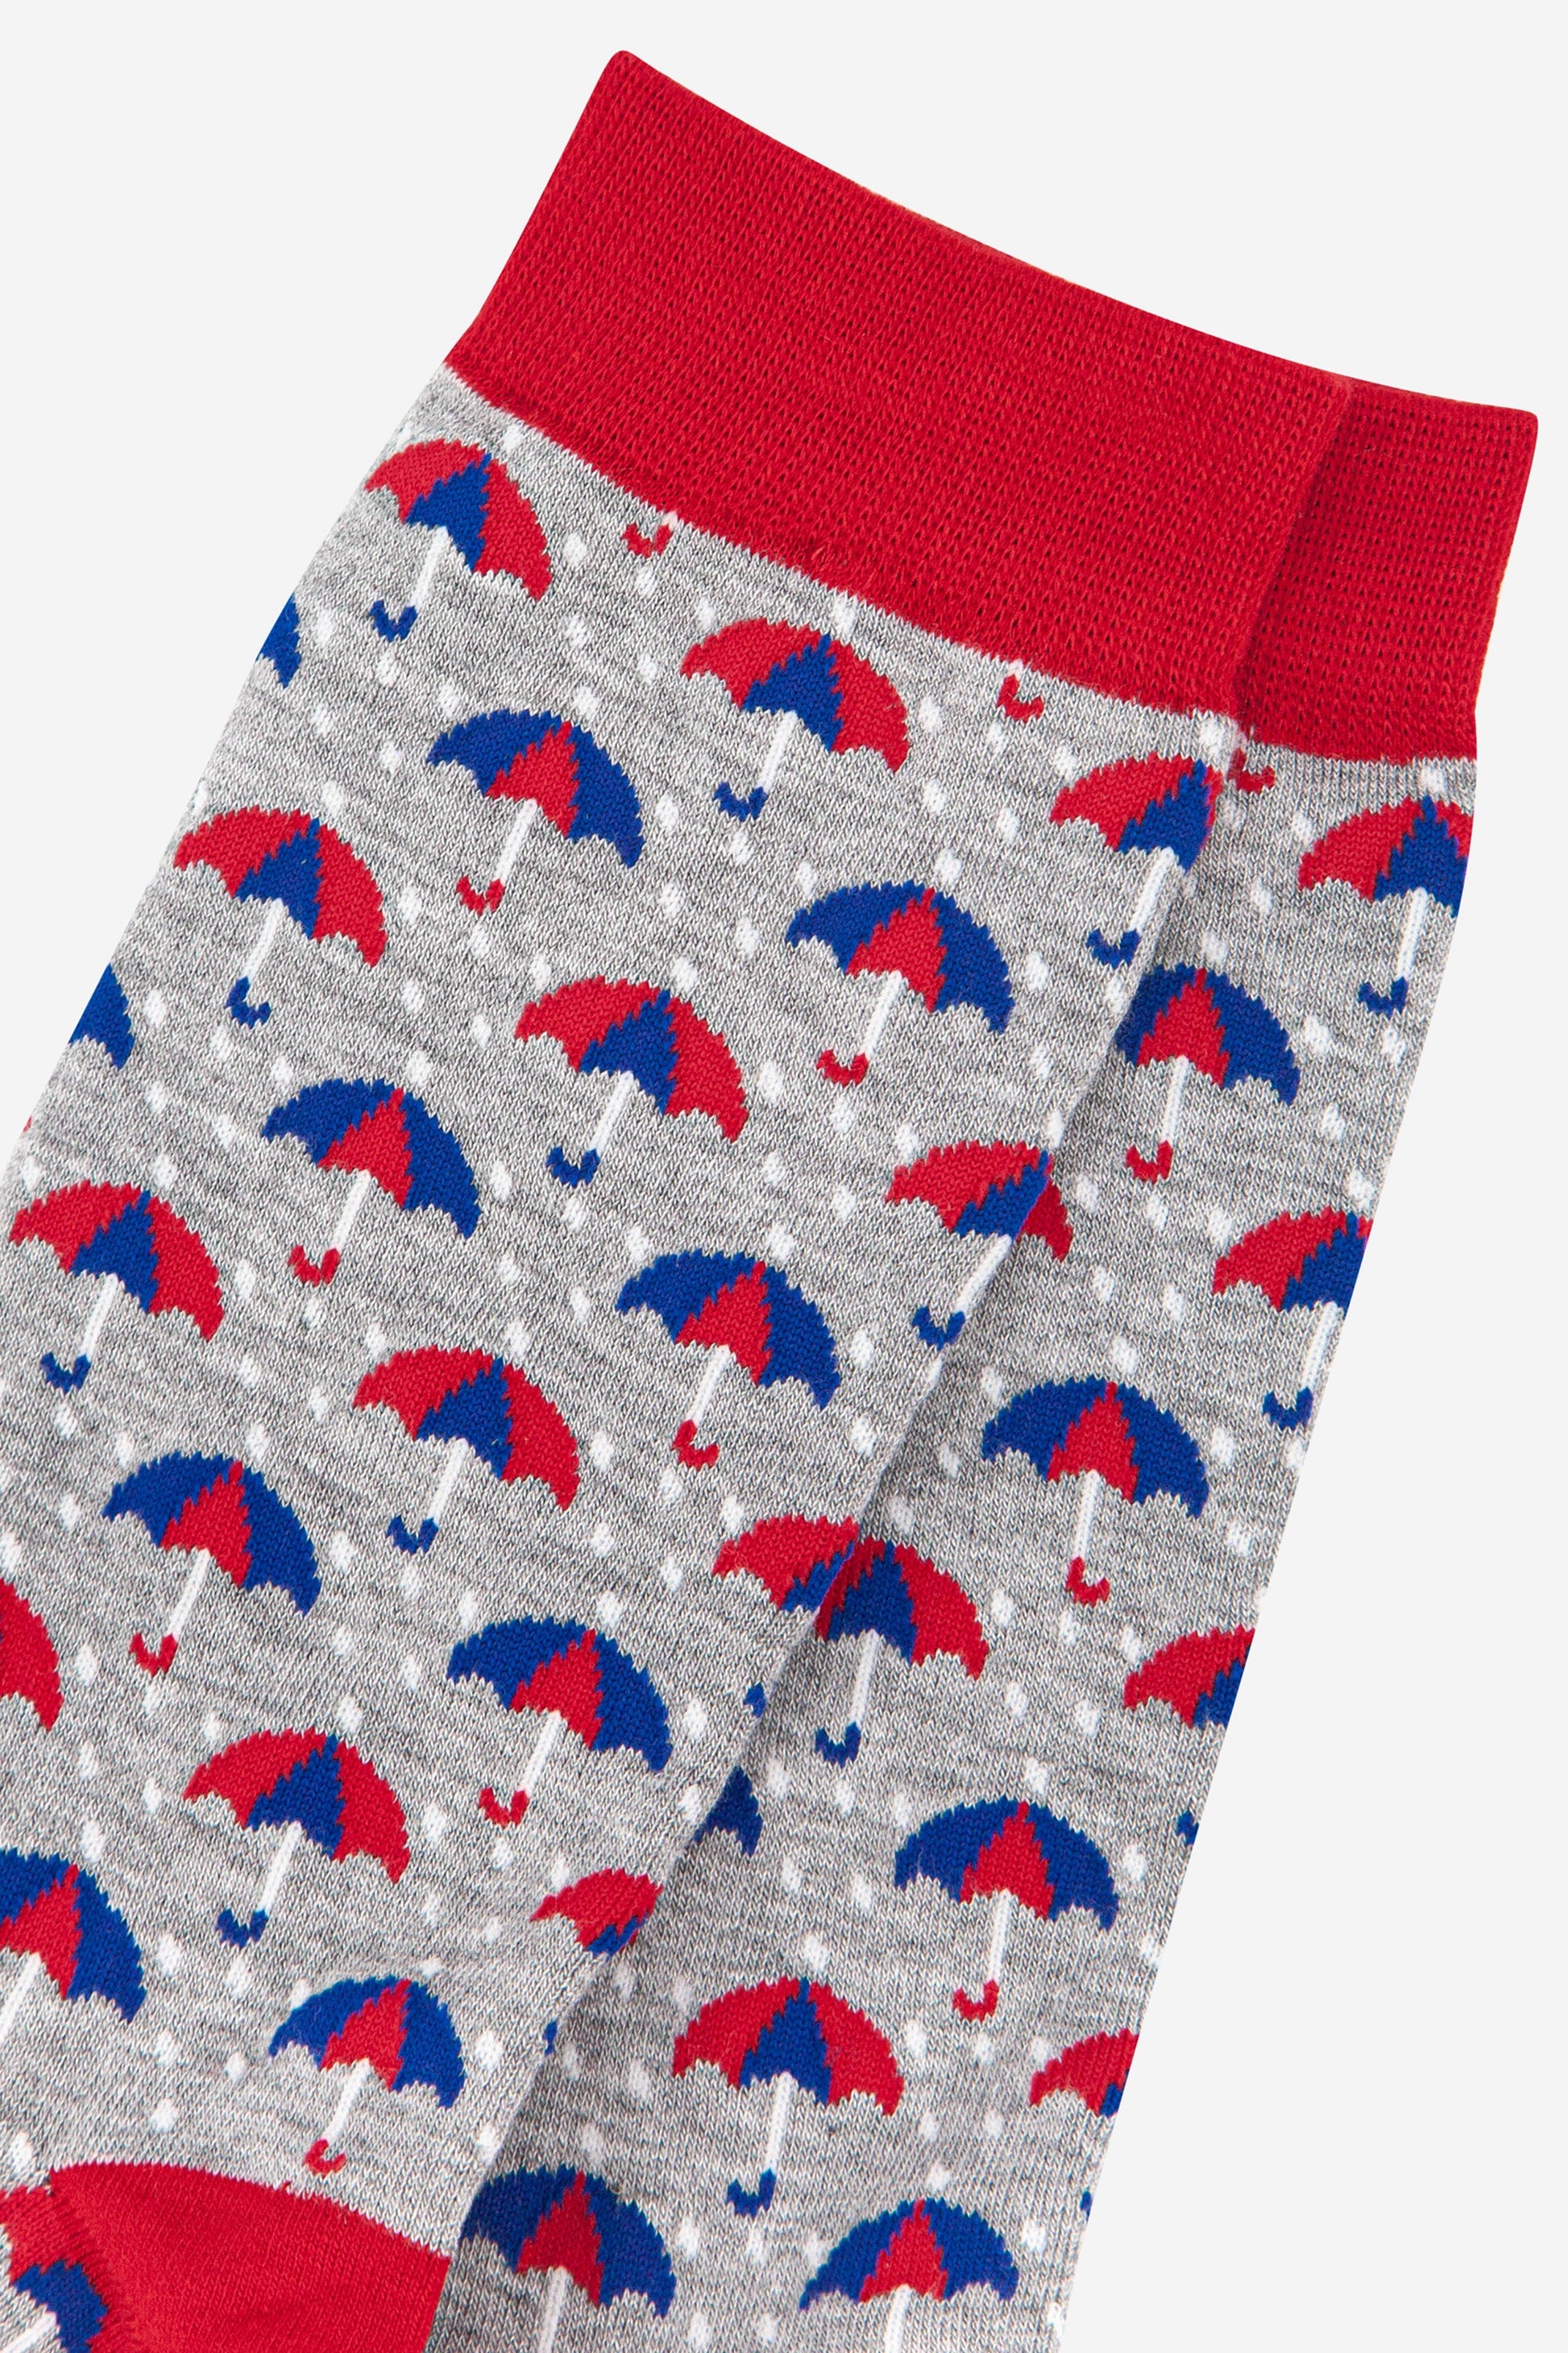 close up of the red and blue umbrella pattern on the bamboo socks